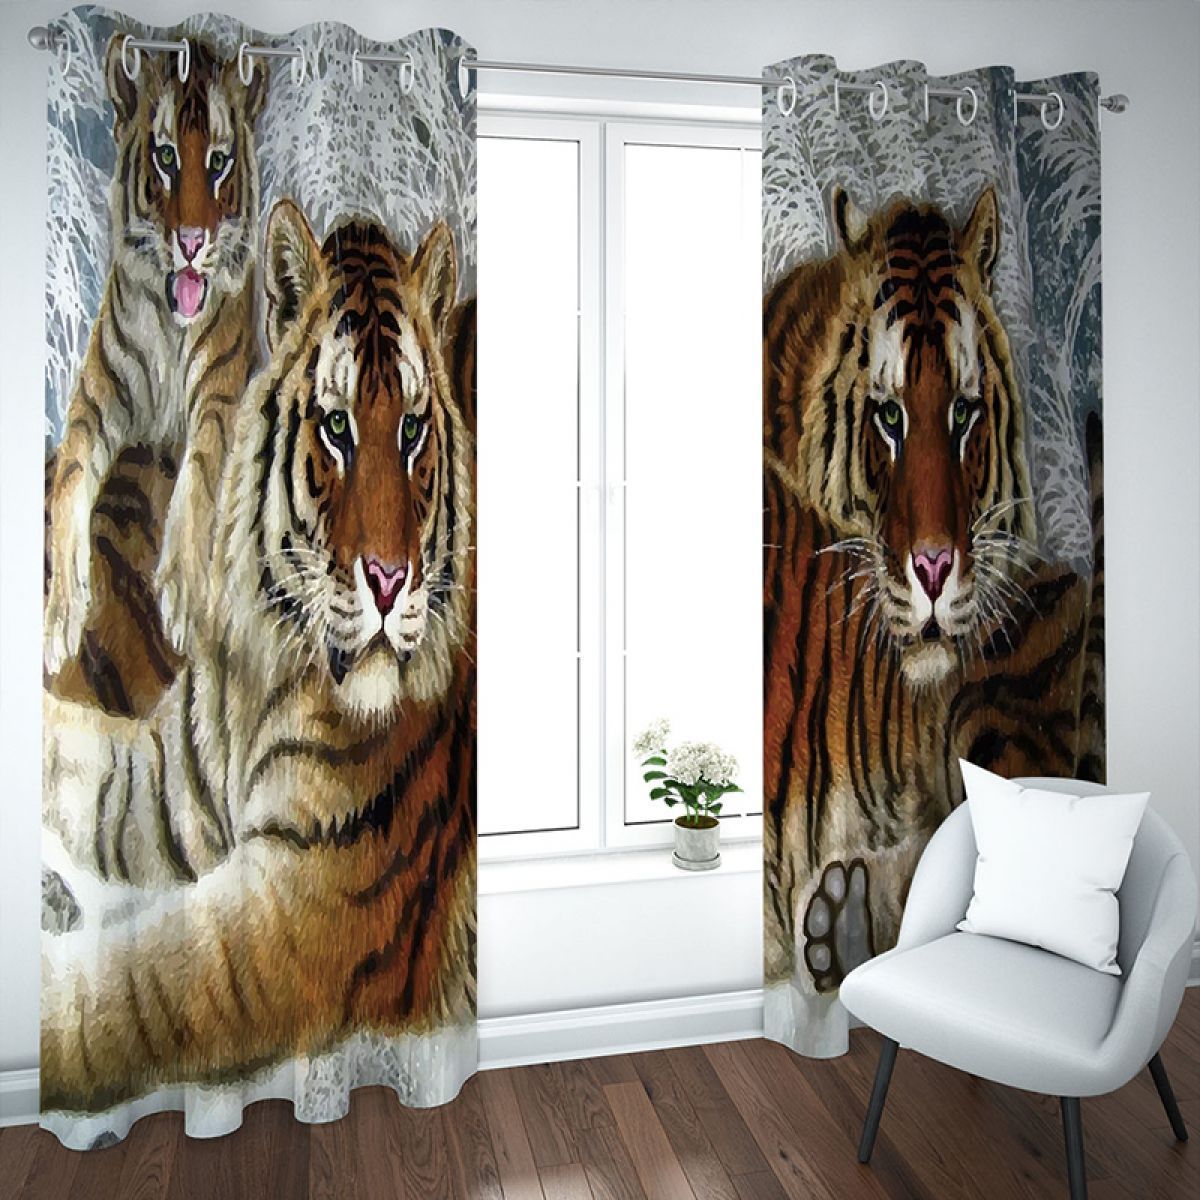 3d Tiger Family Printed Window Curtain Home Decor